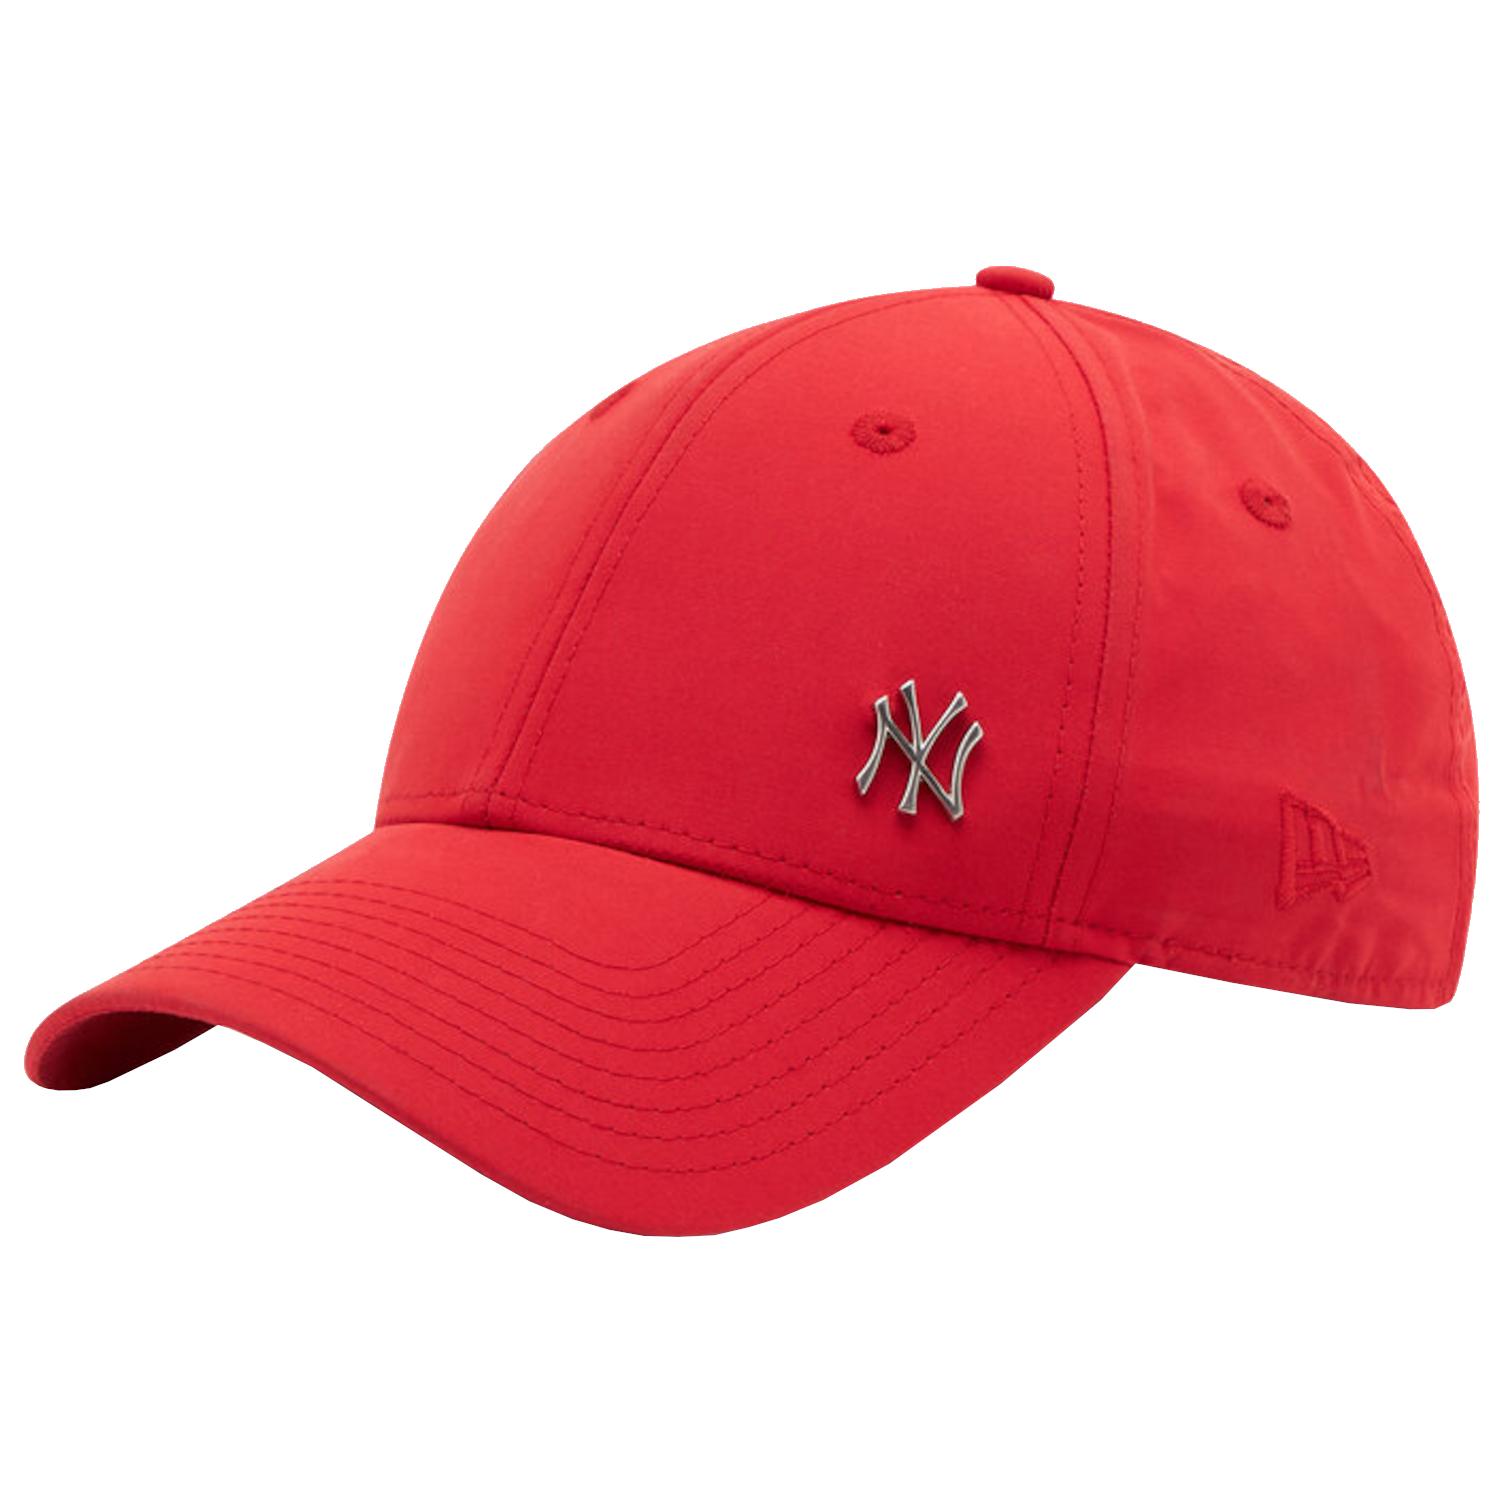 New era 9FORTY New York Yankees Flawless Cap 11198847, Unisex, Caps, red